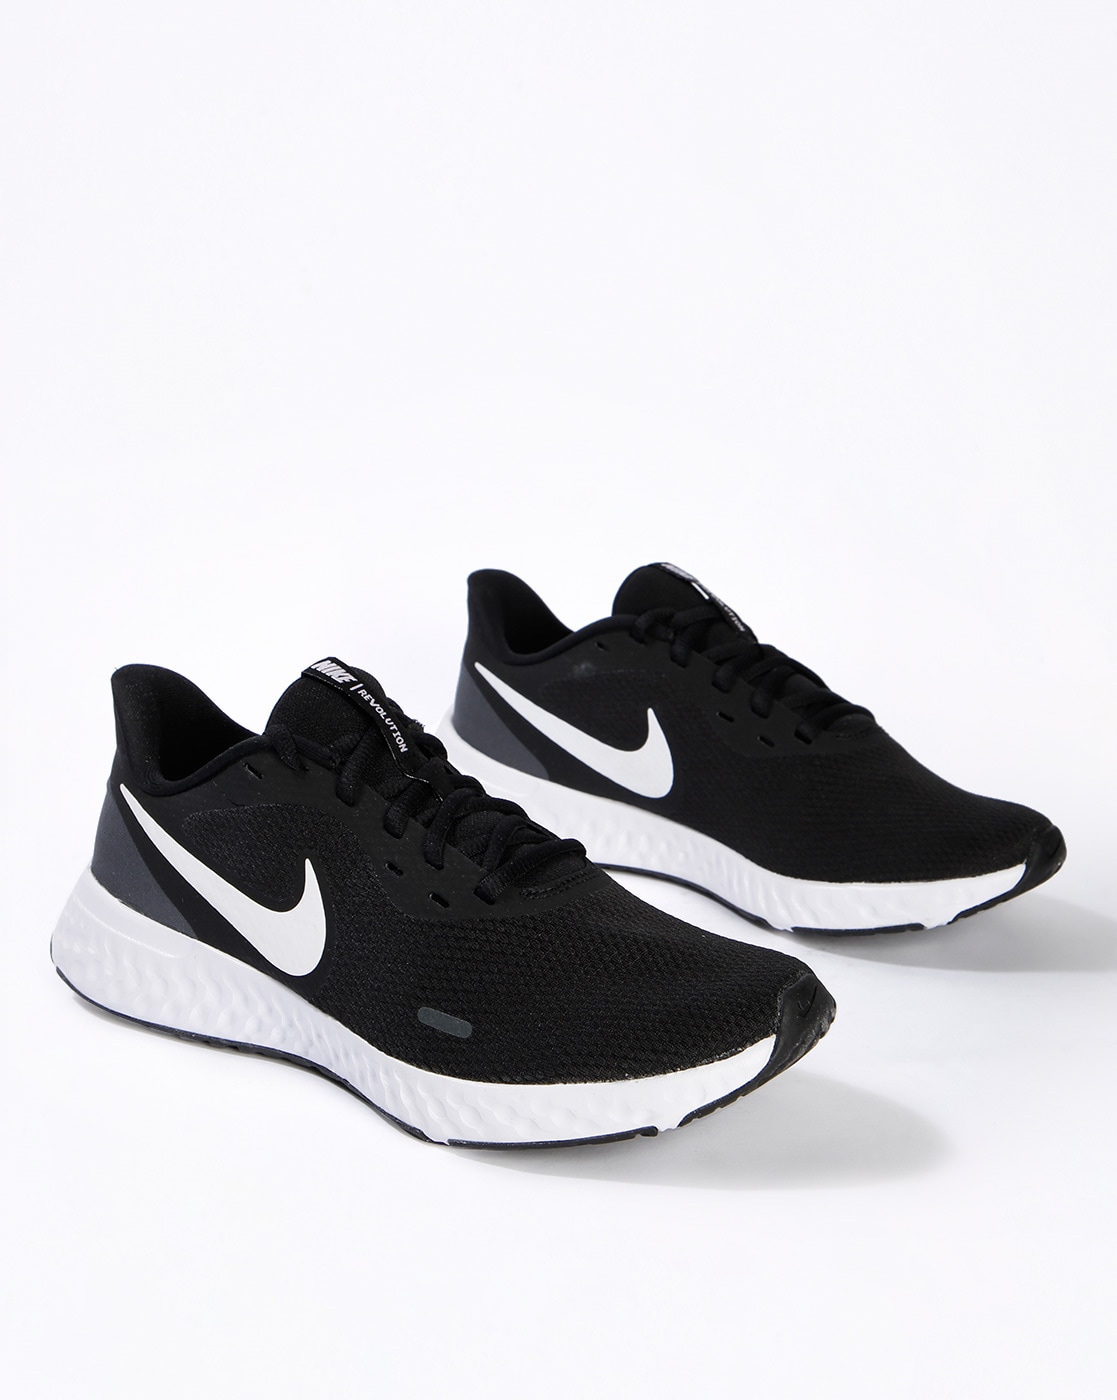 where to buy cheap nikes online